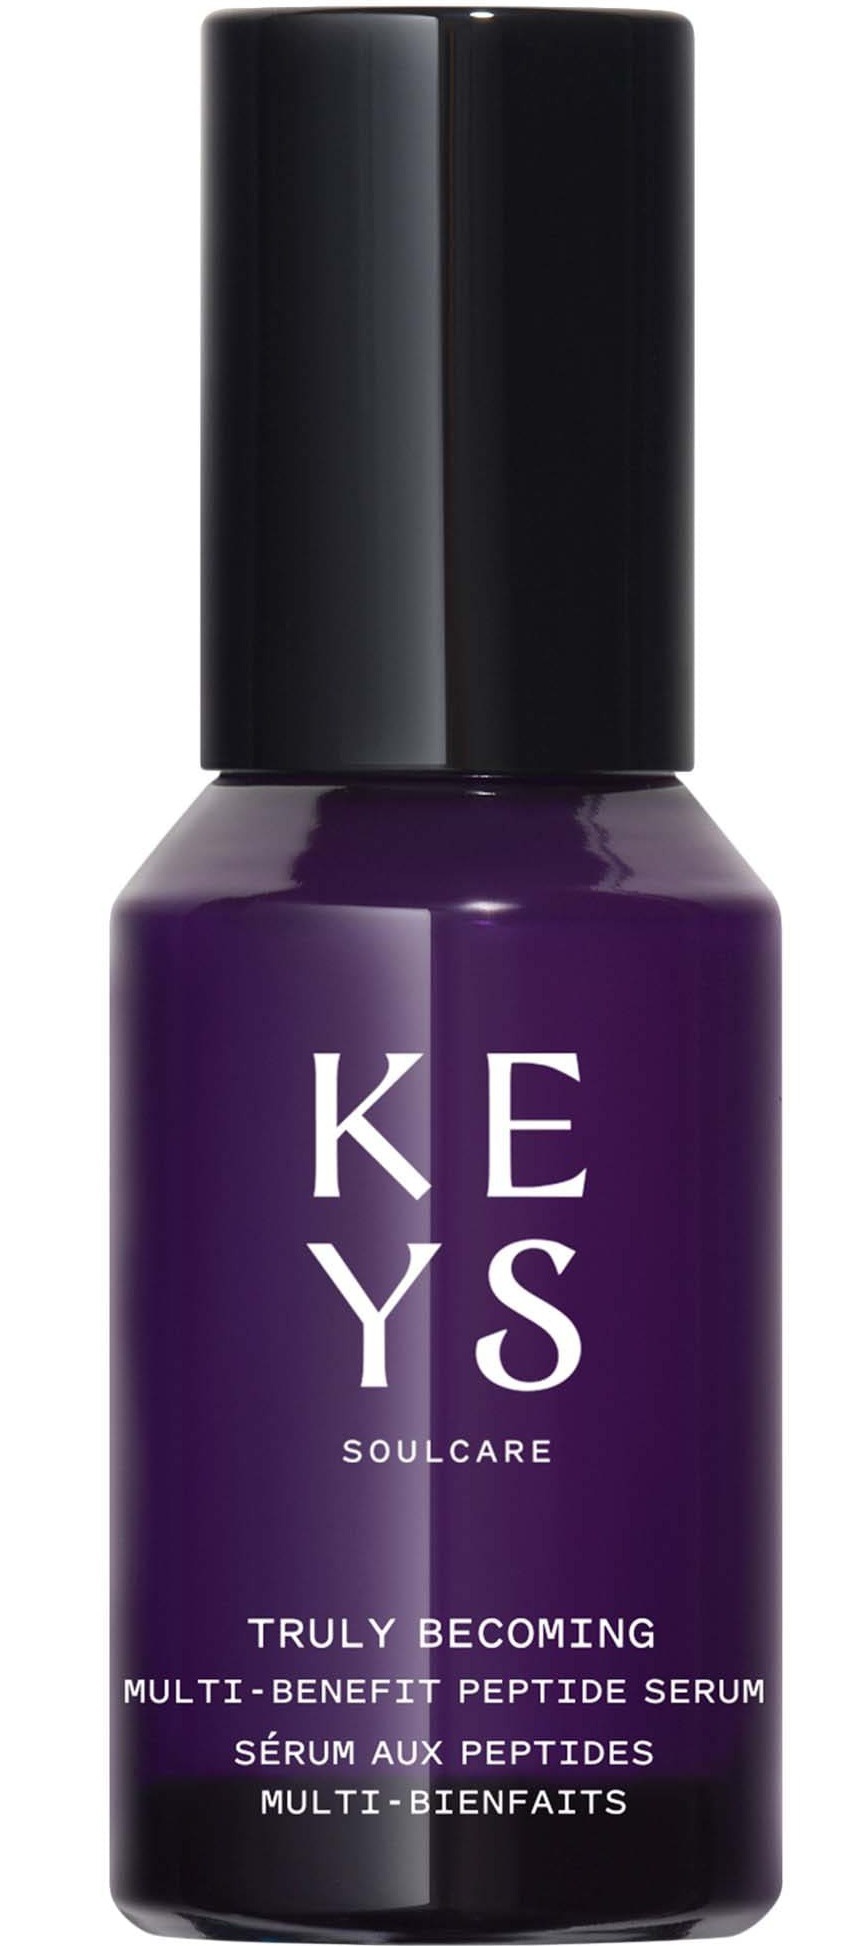 Keys Soulcare Truly Becoming Multi-benefit Peptide Serum